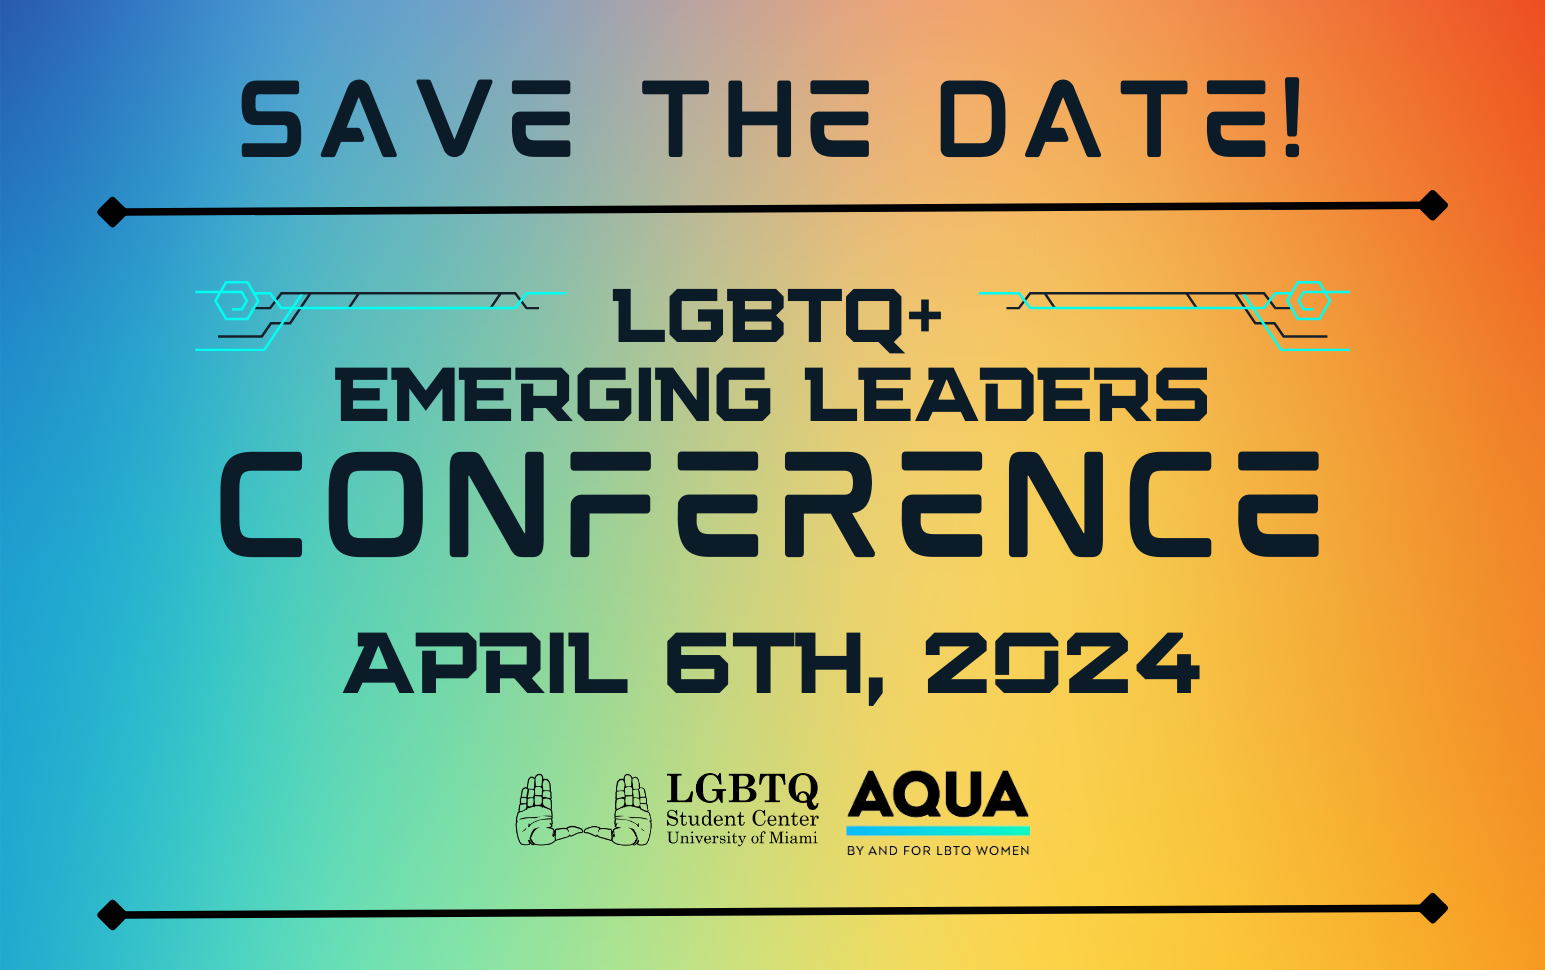 LGBTQ+ Emerging Leaders Conference: Save the Date